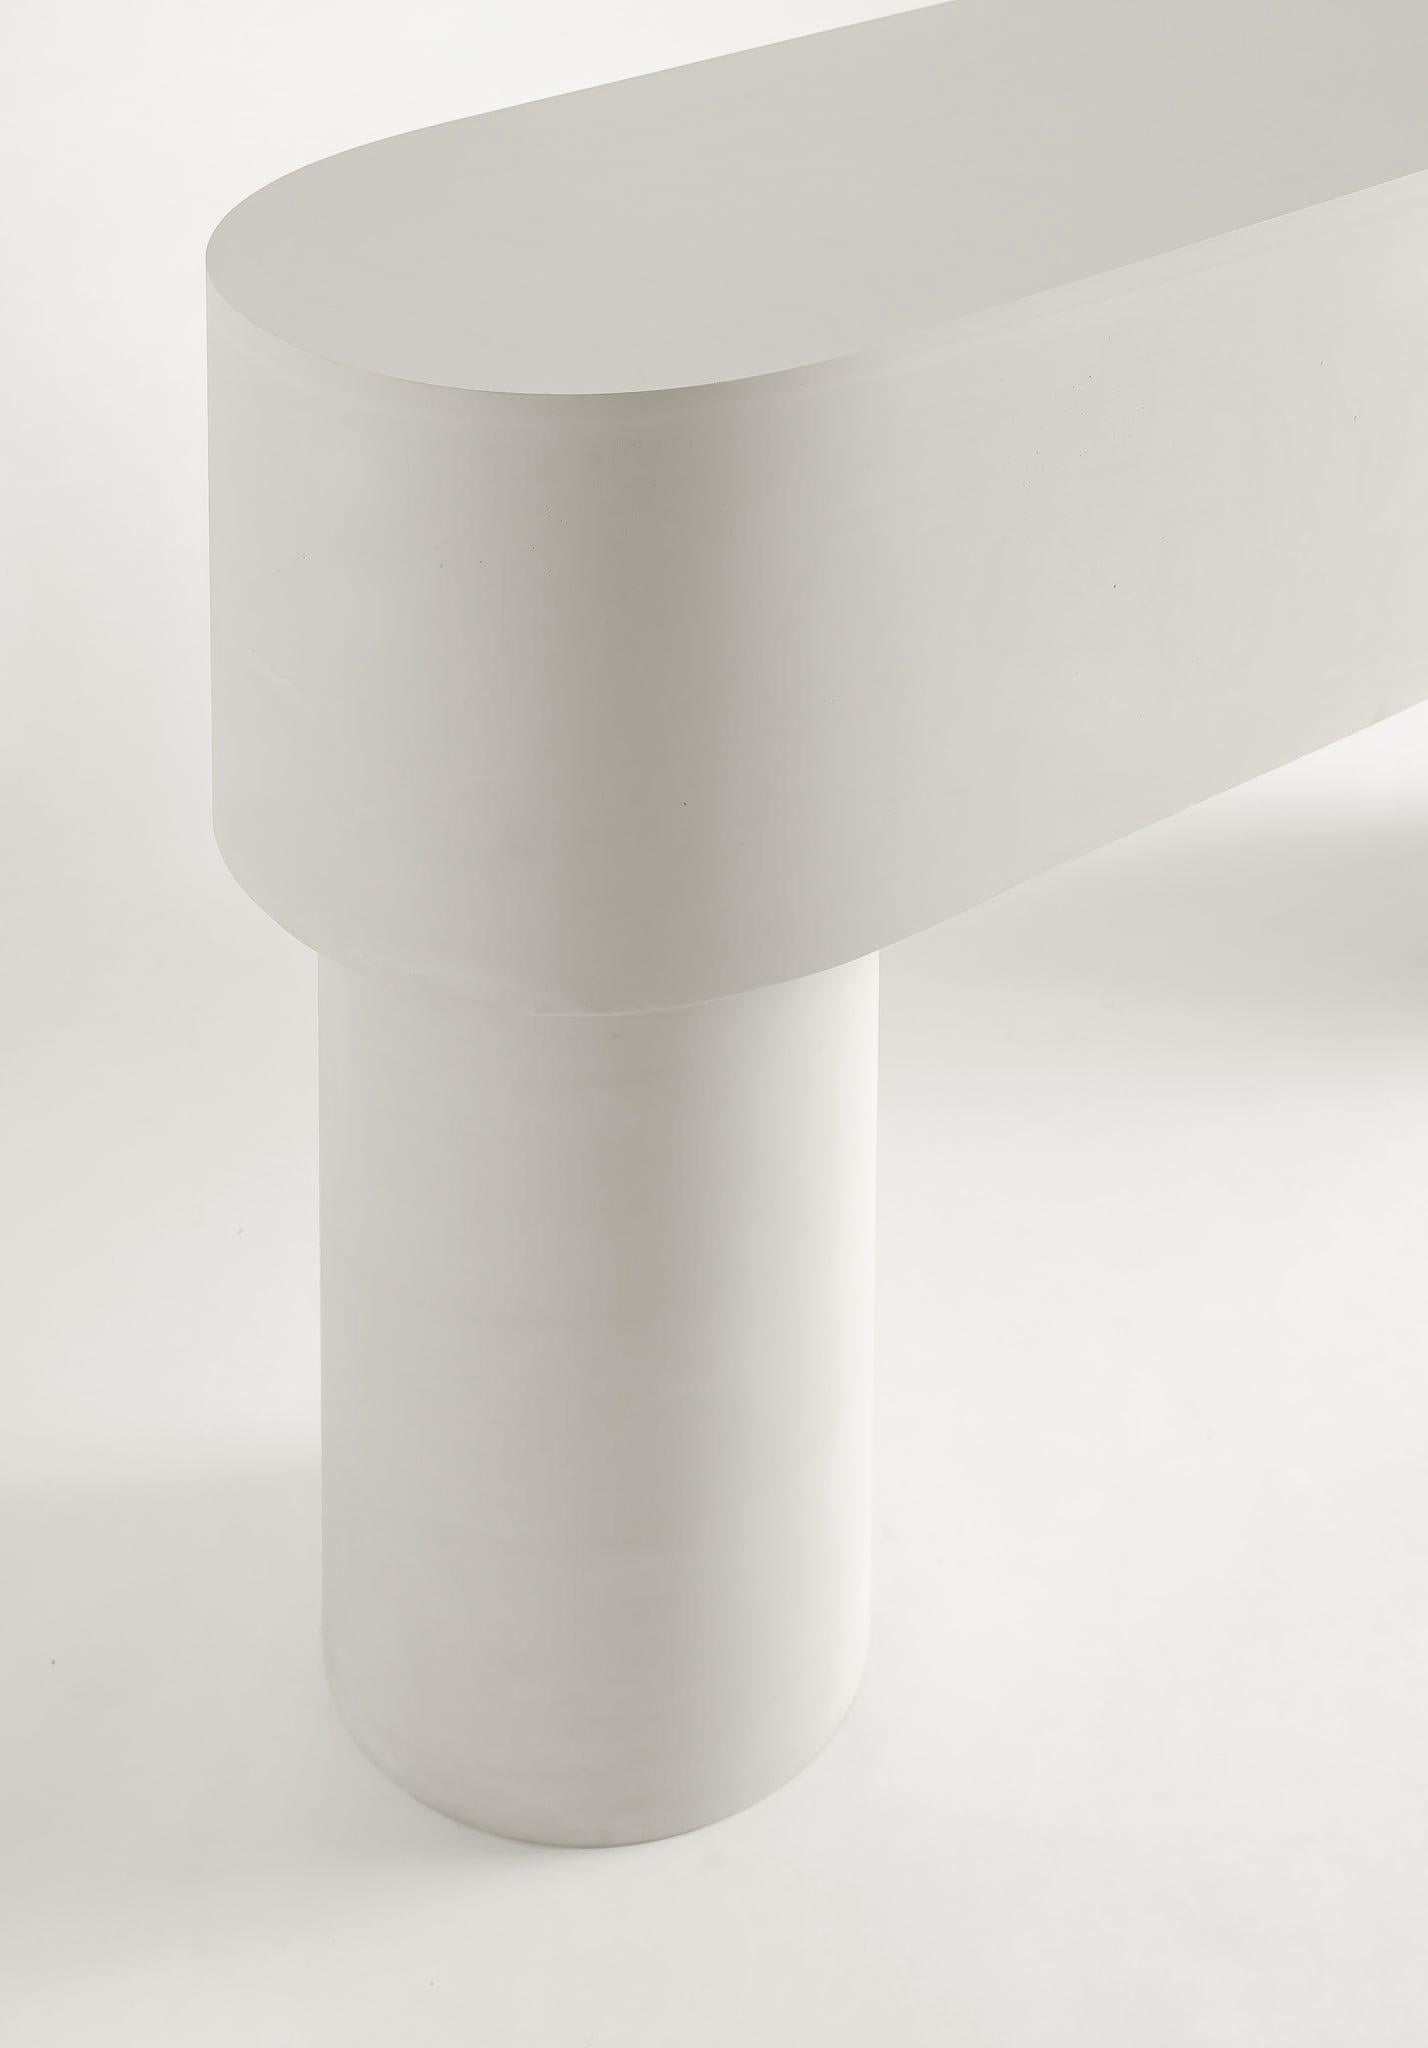 Contemporary Jesmonite Console - Pilotis Console Table by Malgorzata Bany.

Inspired by support columns that lift a building above ground or water. Each piece is formed using a mould made of paper, used only once, making each piece unique. Available